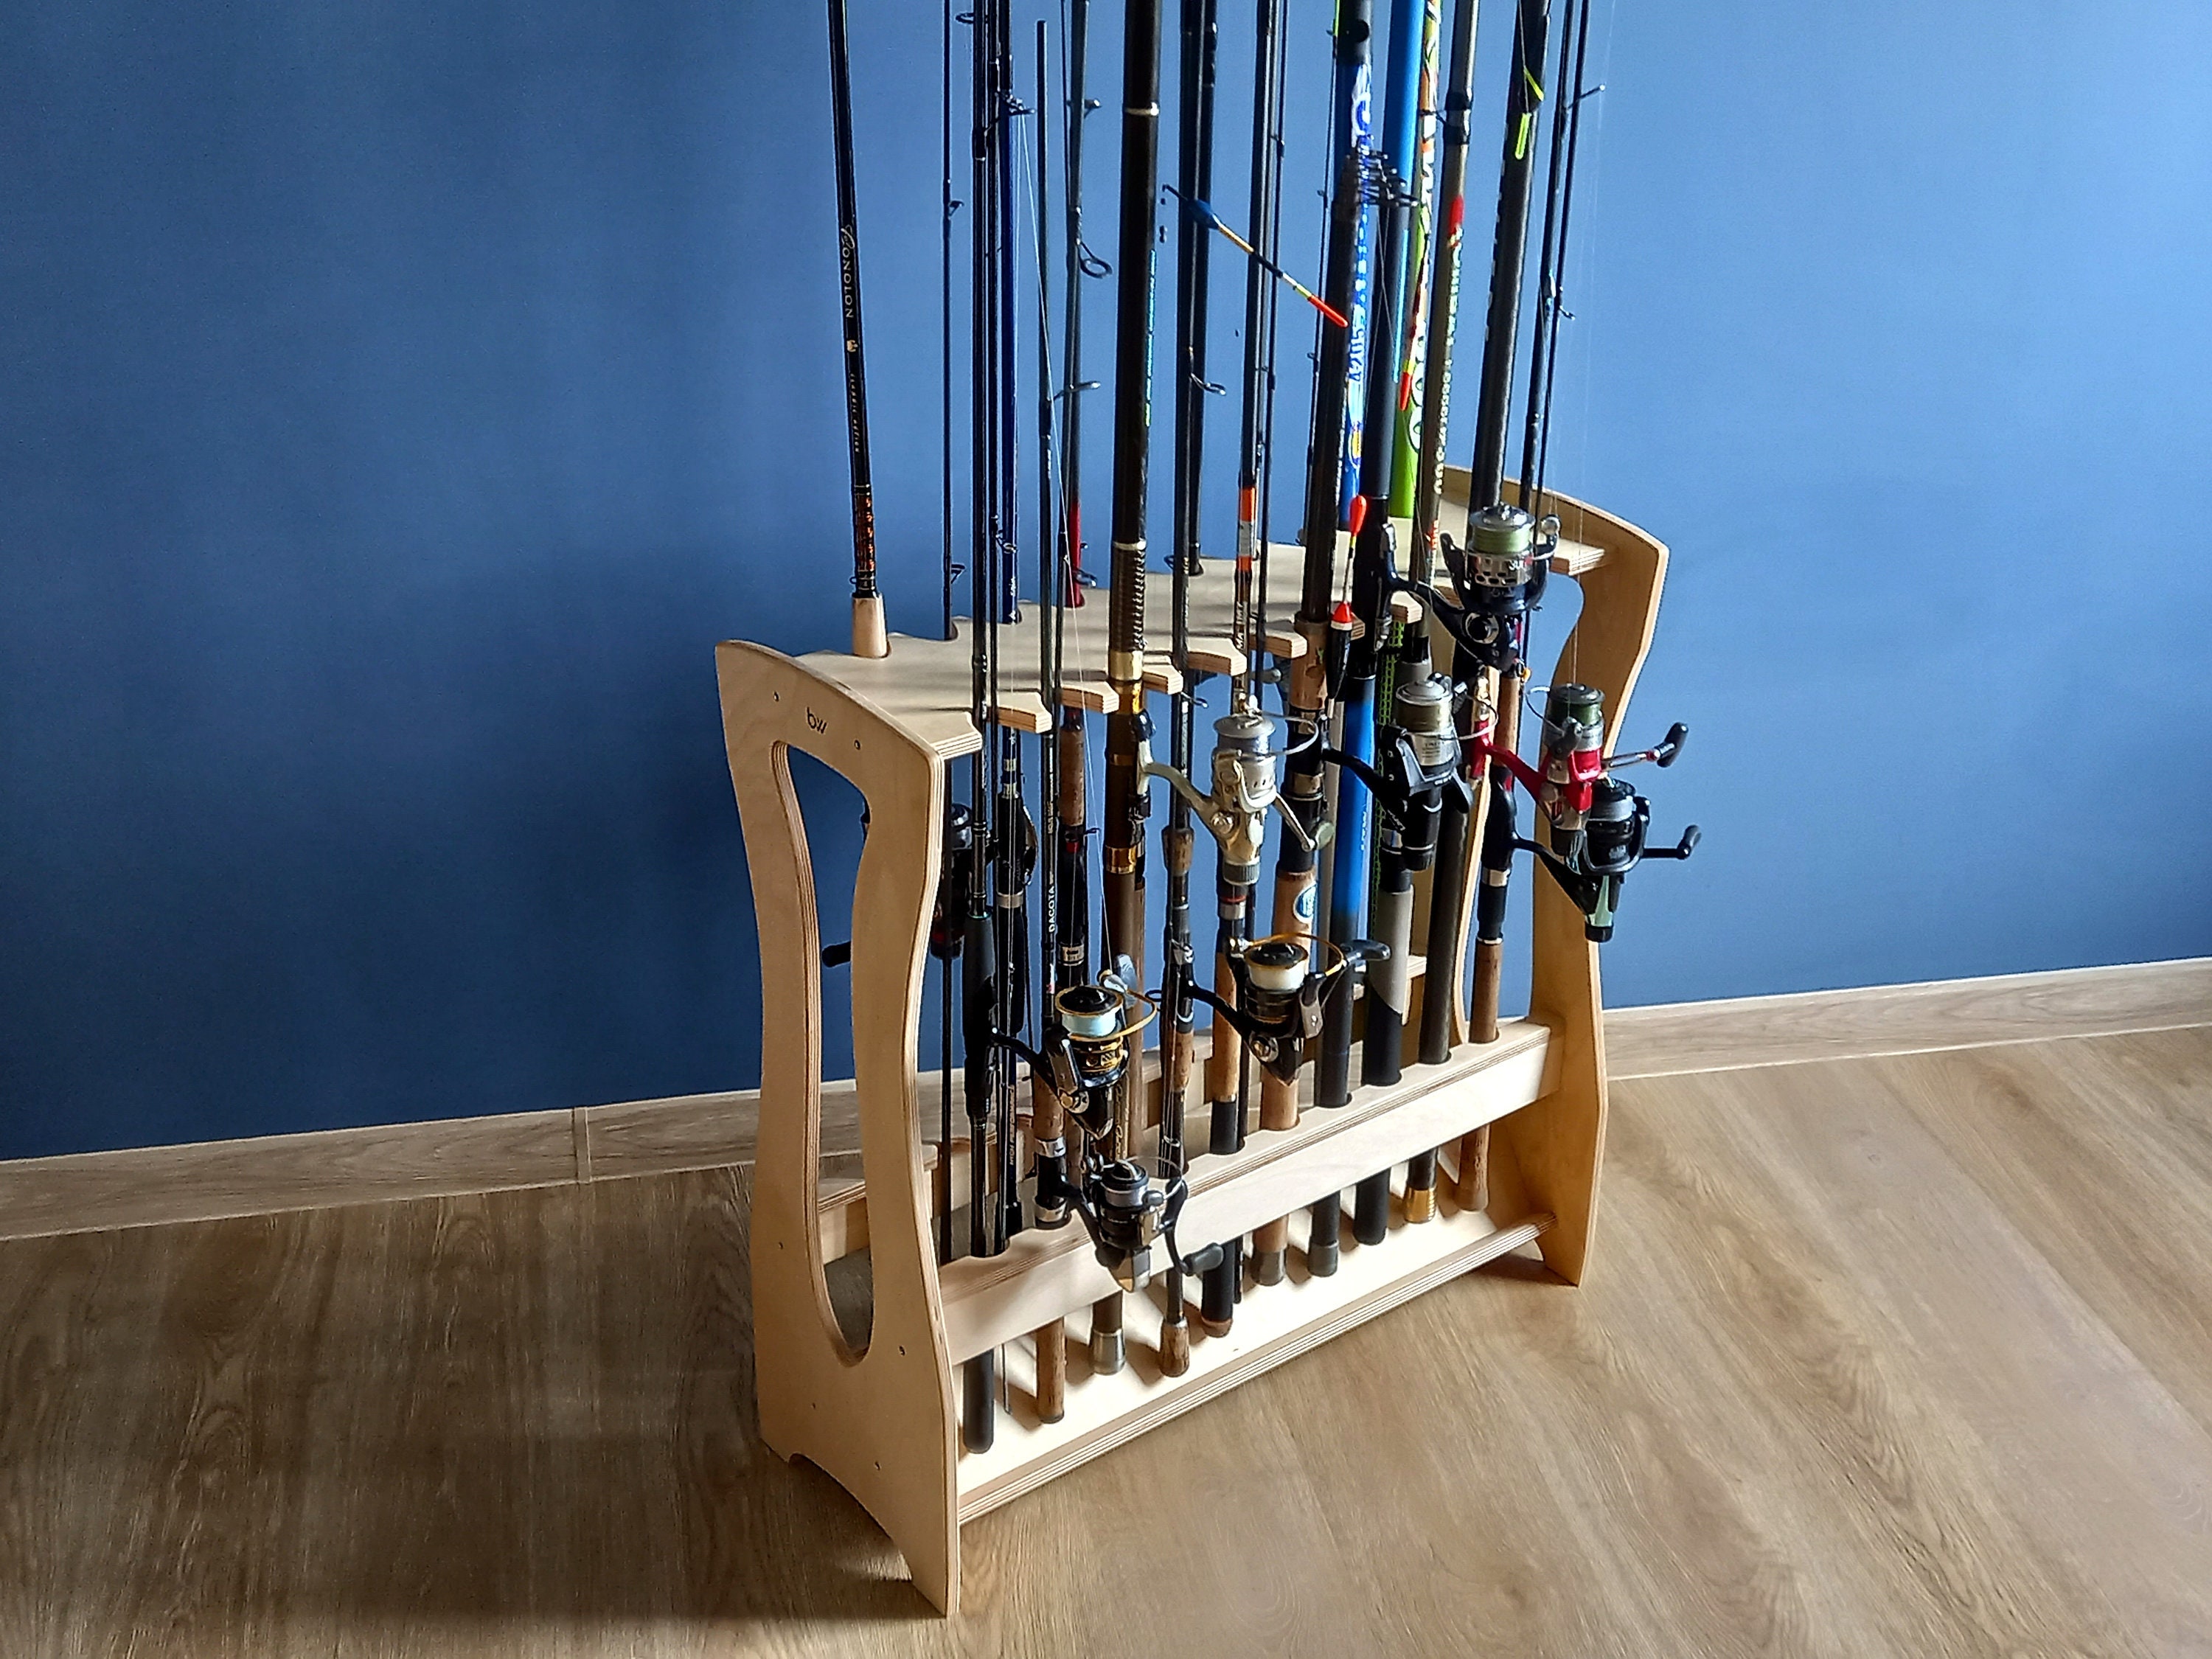 21 INSHORE Fishing Rod Rack Holder Garage Ceiling or Wall Mounted Storage  organizer for Pole and Reel Perfect Fishing Gift 